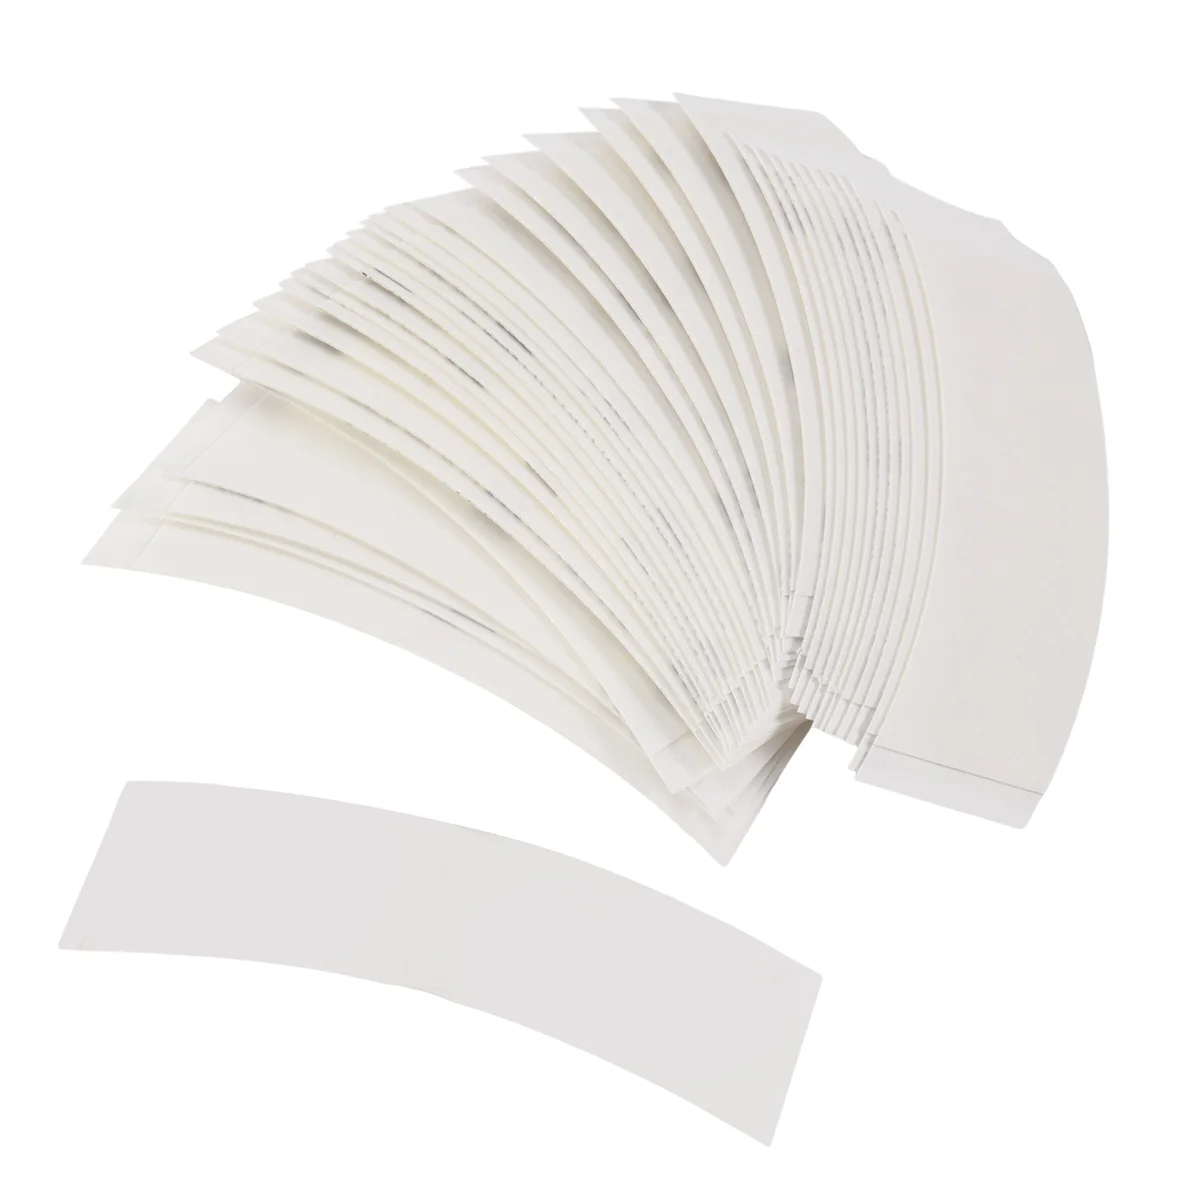 

36Pcs/Lot Wig Double Sided Tape Strong Adhesive Hair System Extension Strips Waterproof for Toupees/Lace Wig